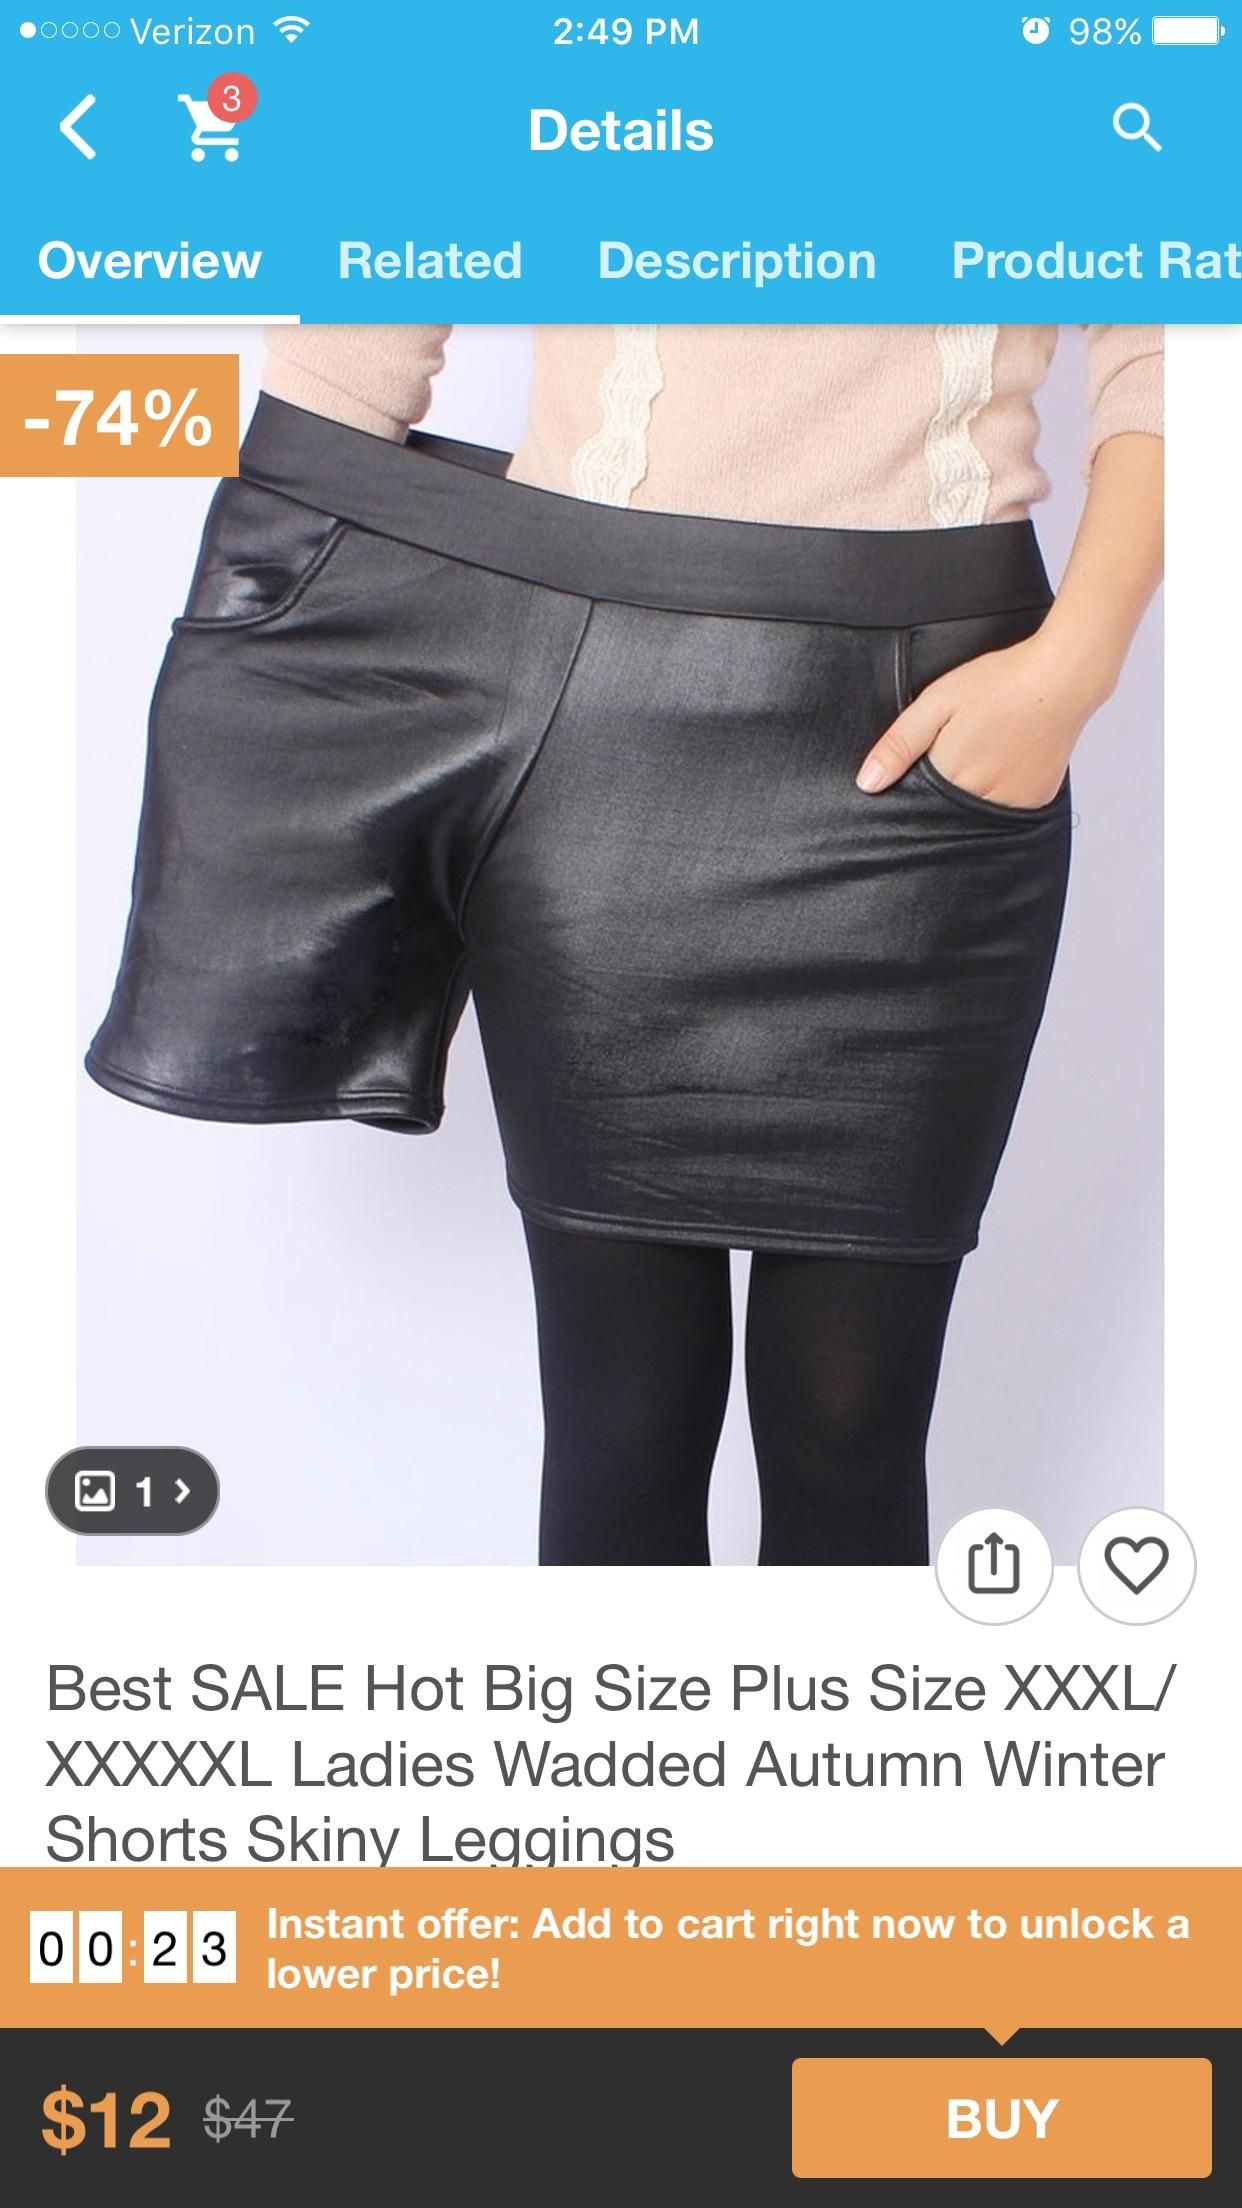 When they can't find a plus size model in China